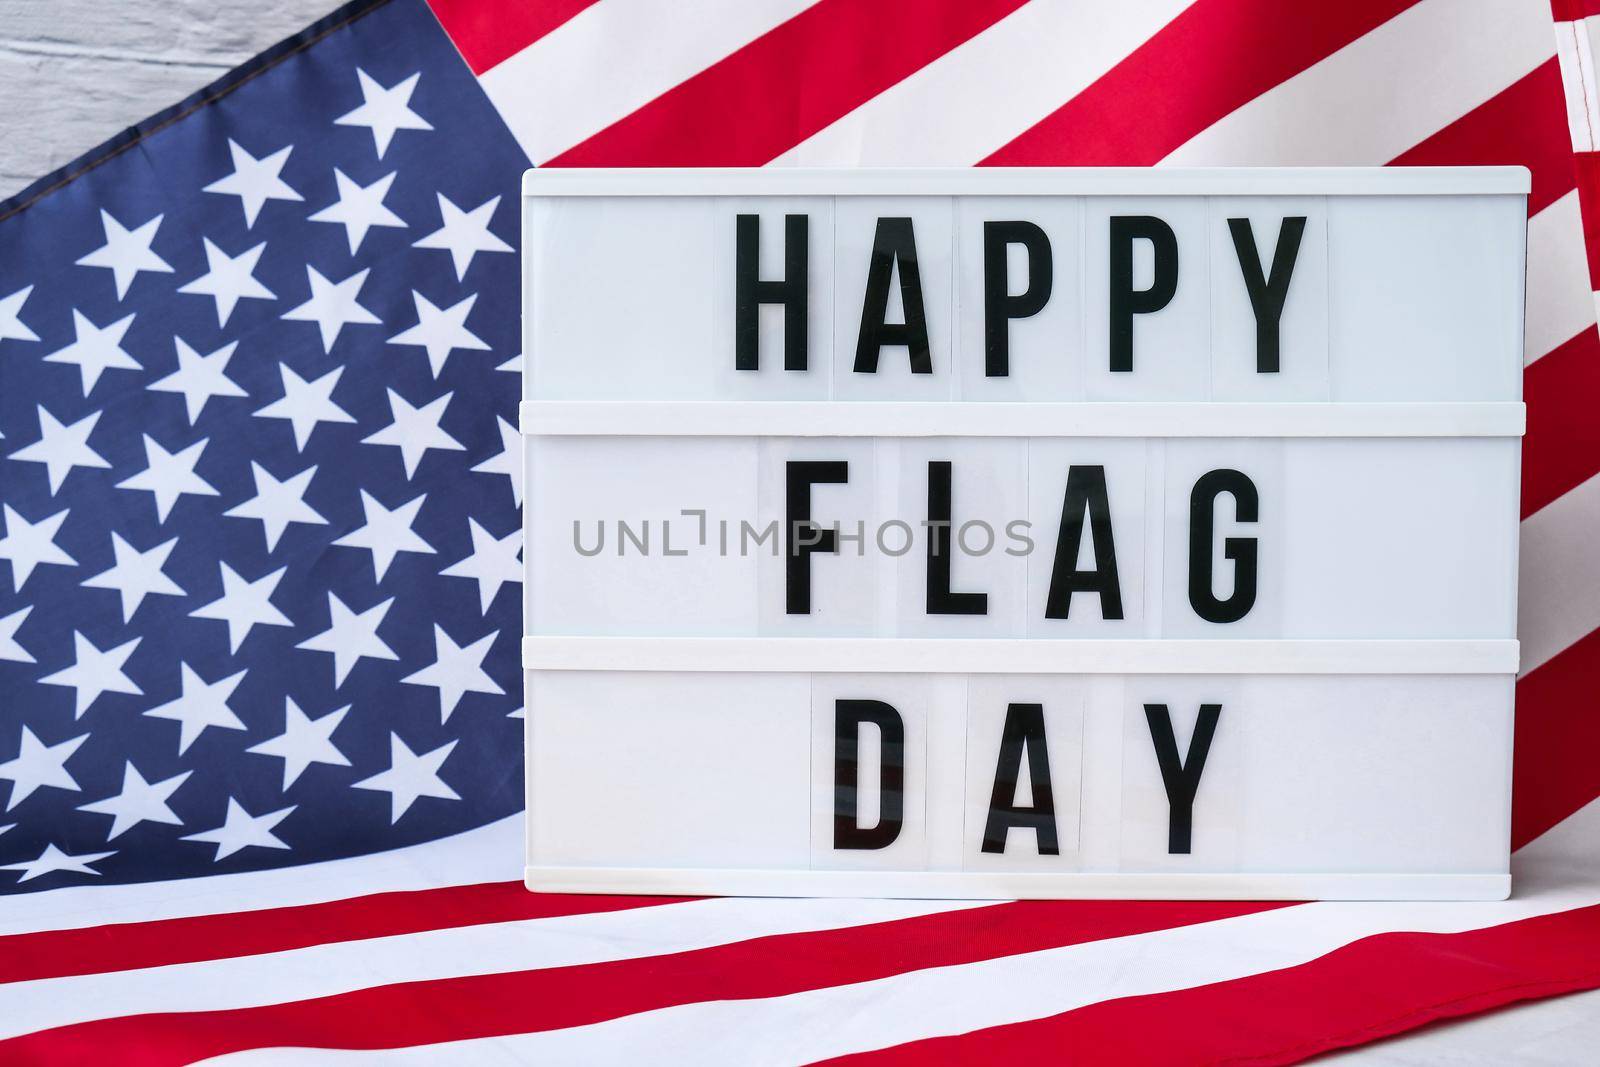 American flag. Lightbox with text HAPPY FLAG DAY Flag of the united states of America. July 4th Independence Day. USA patriotism national holiday. Usa proud. by anna_stasiia